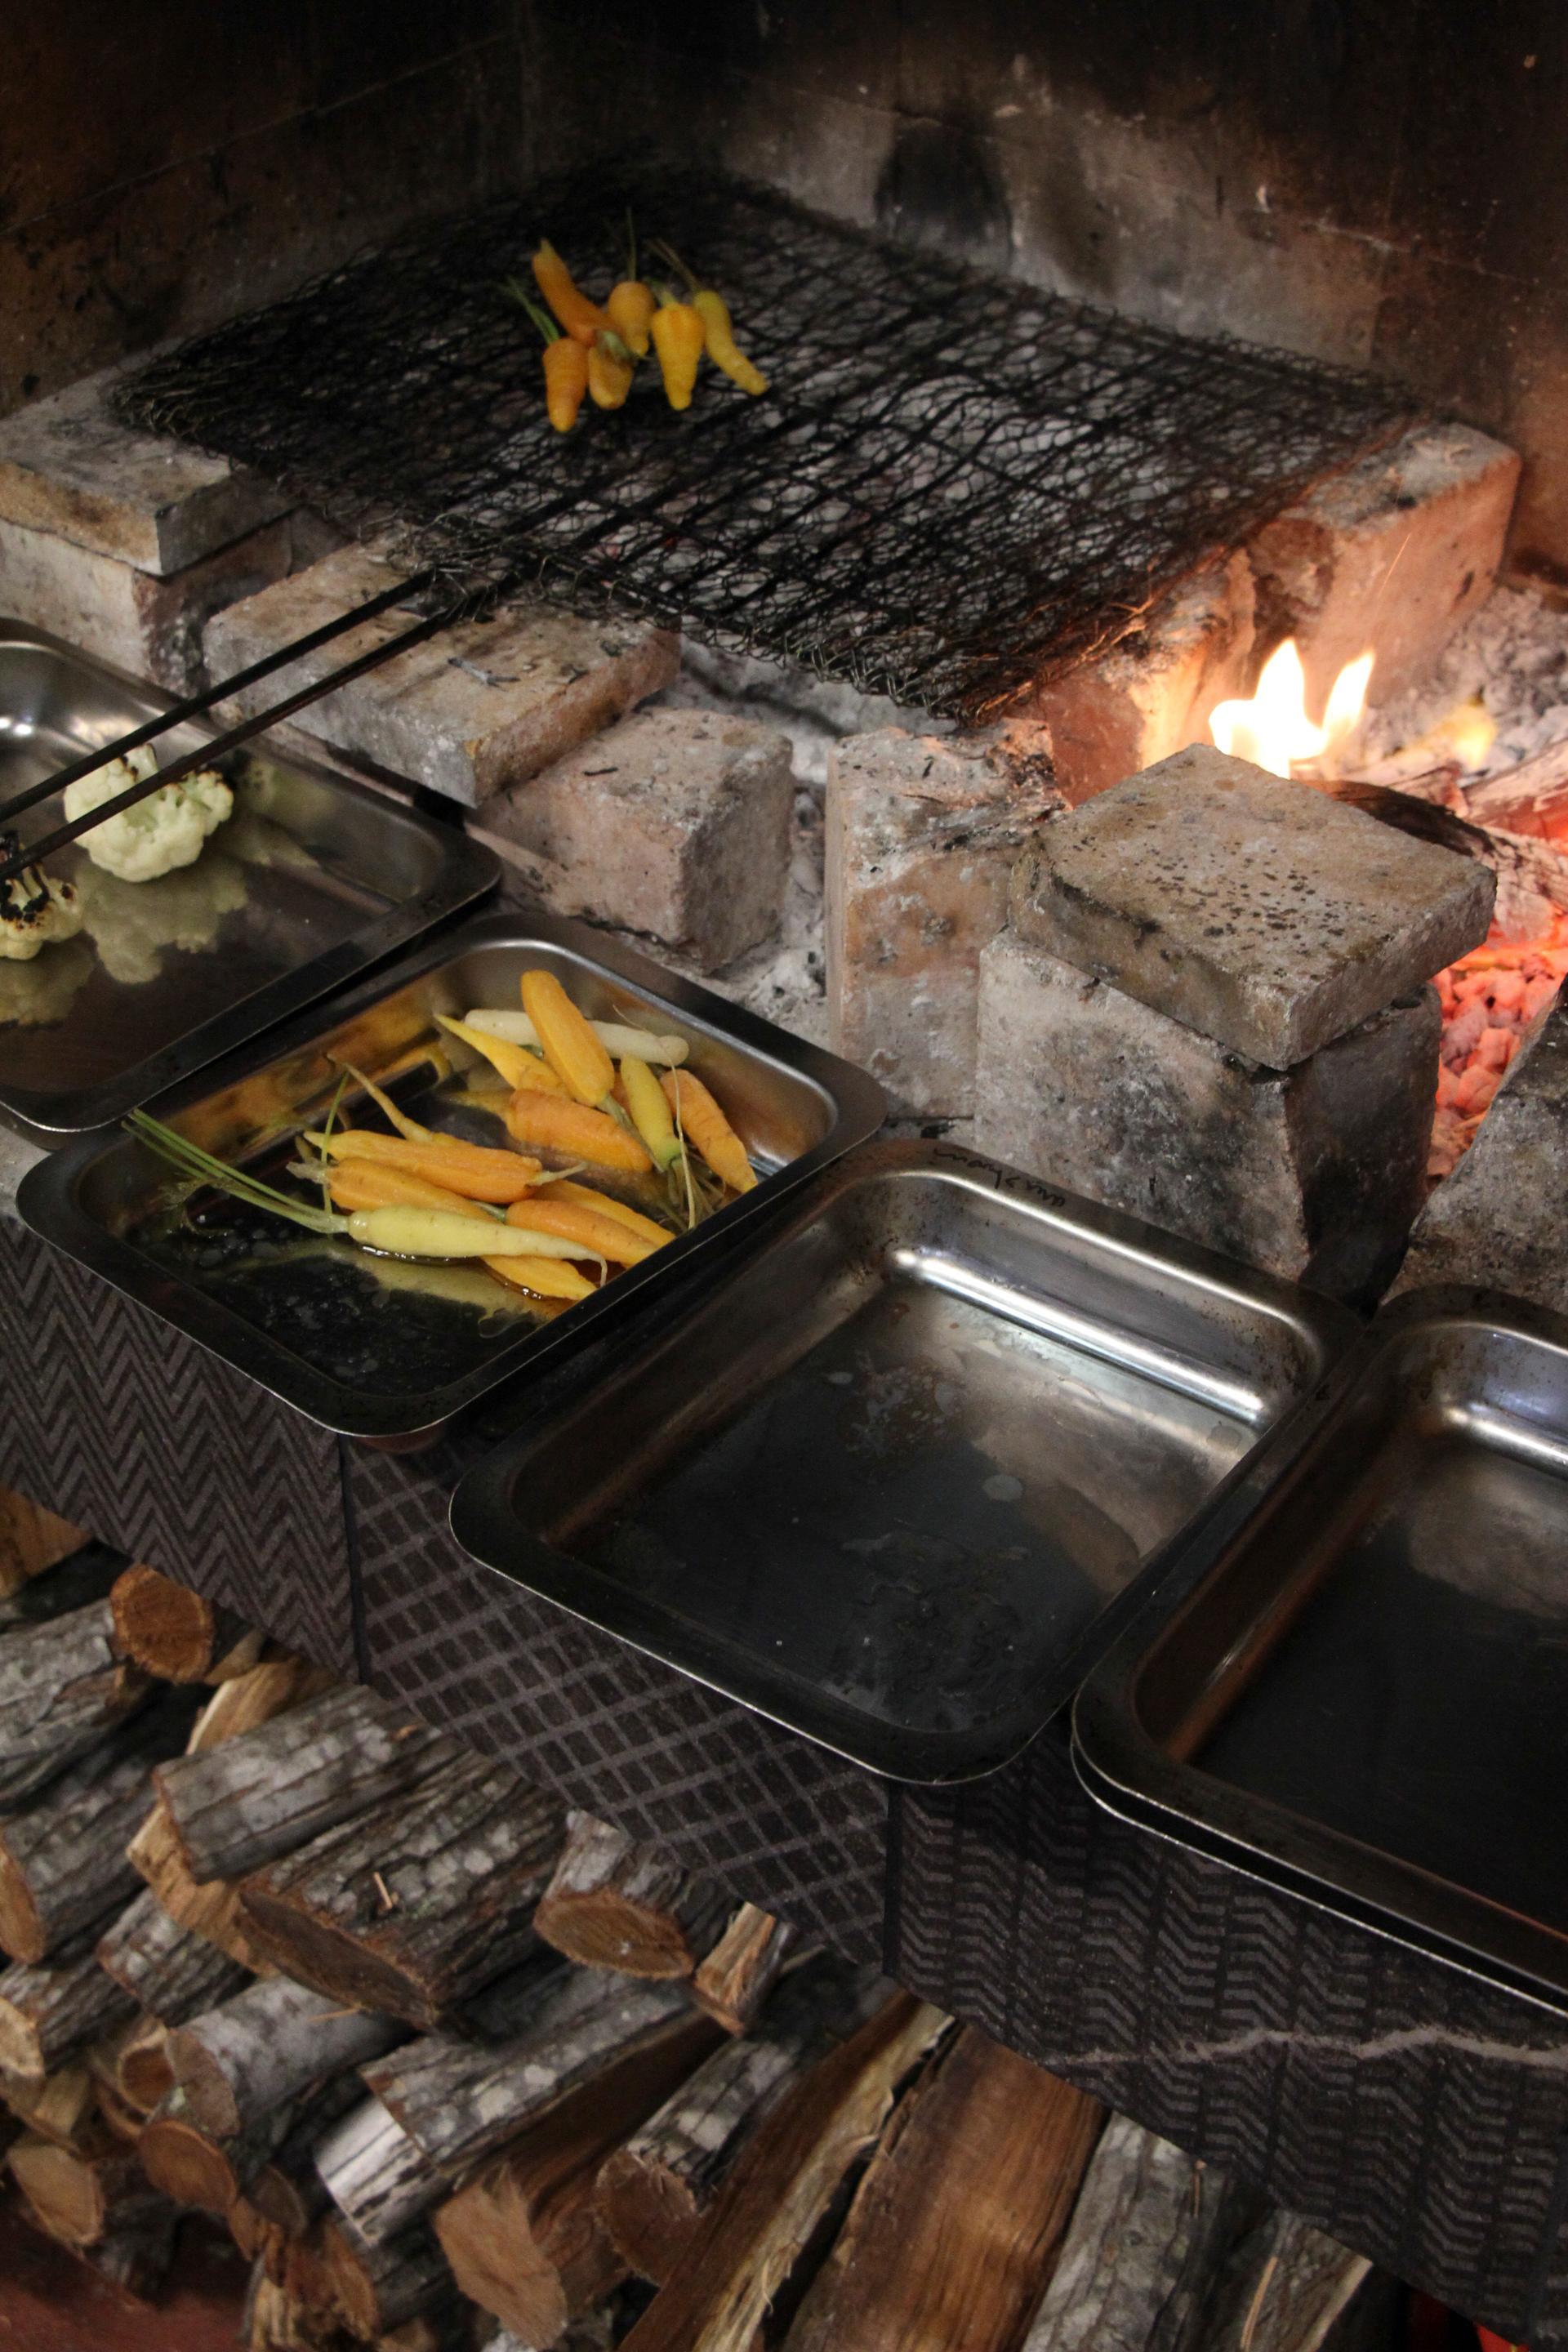 KUDU Open Fire Grill Leading the Live Fire Cooking Trend This Summer